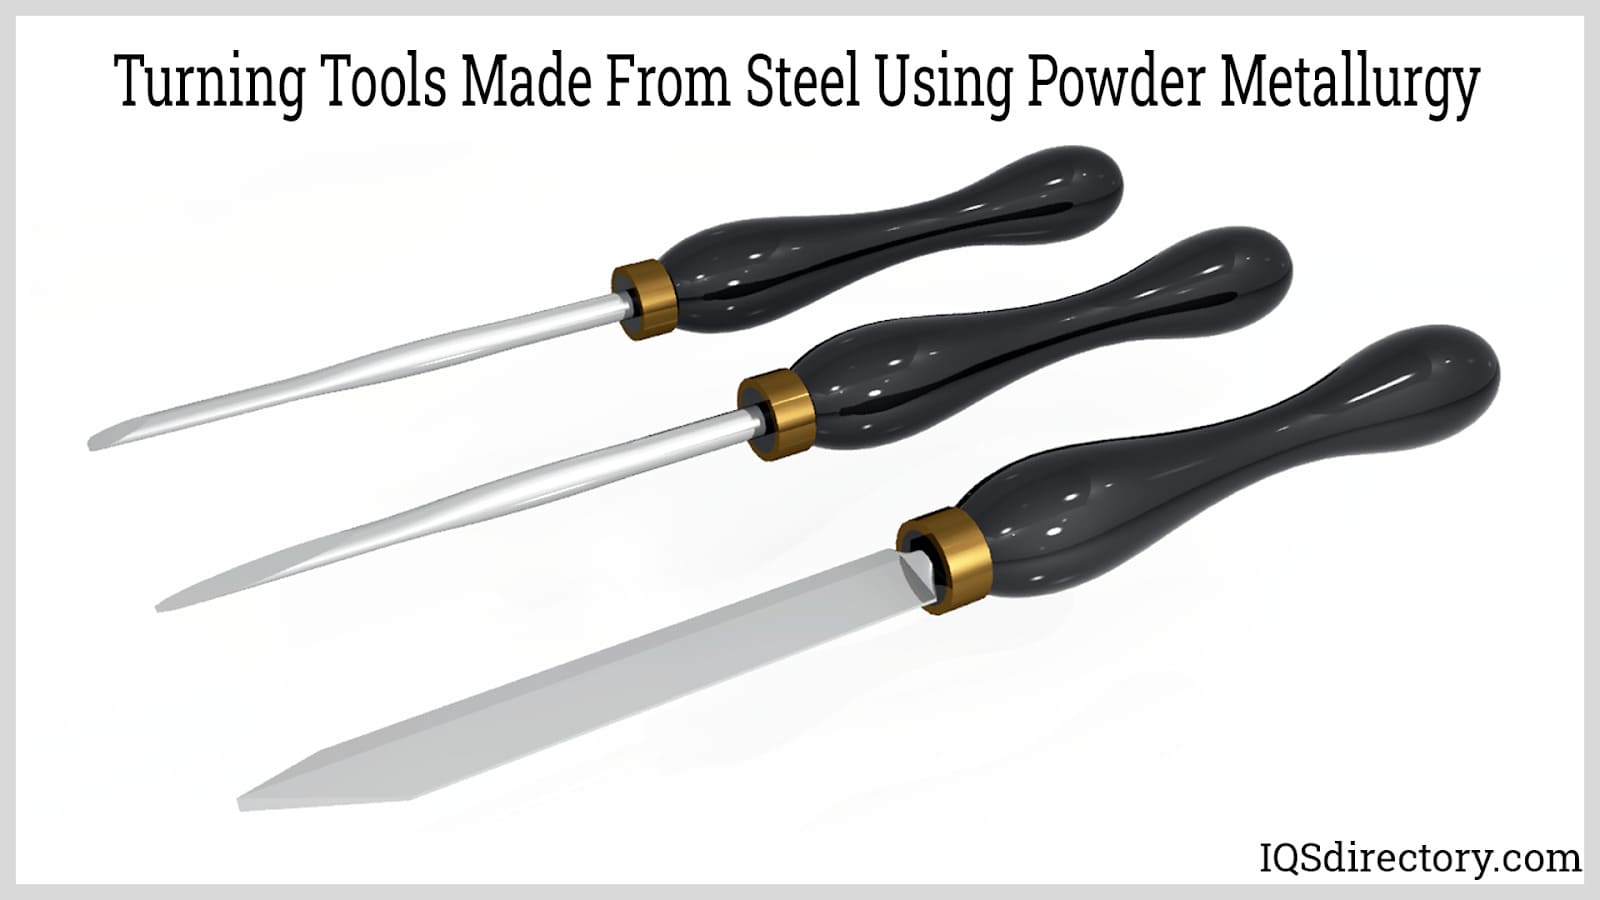 Turning Tools Made From Steel Using Powder Metallurgy